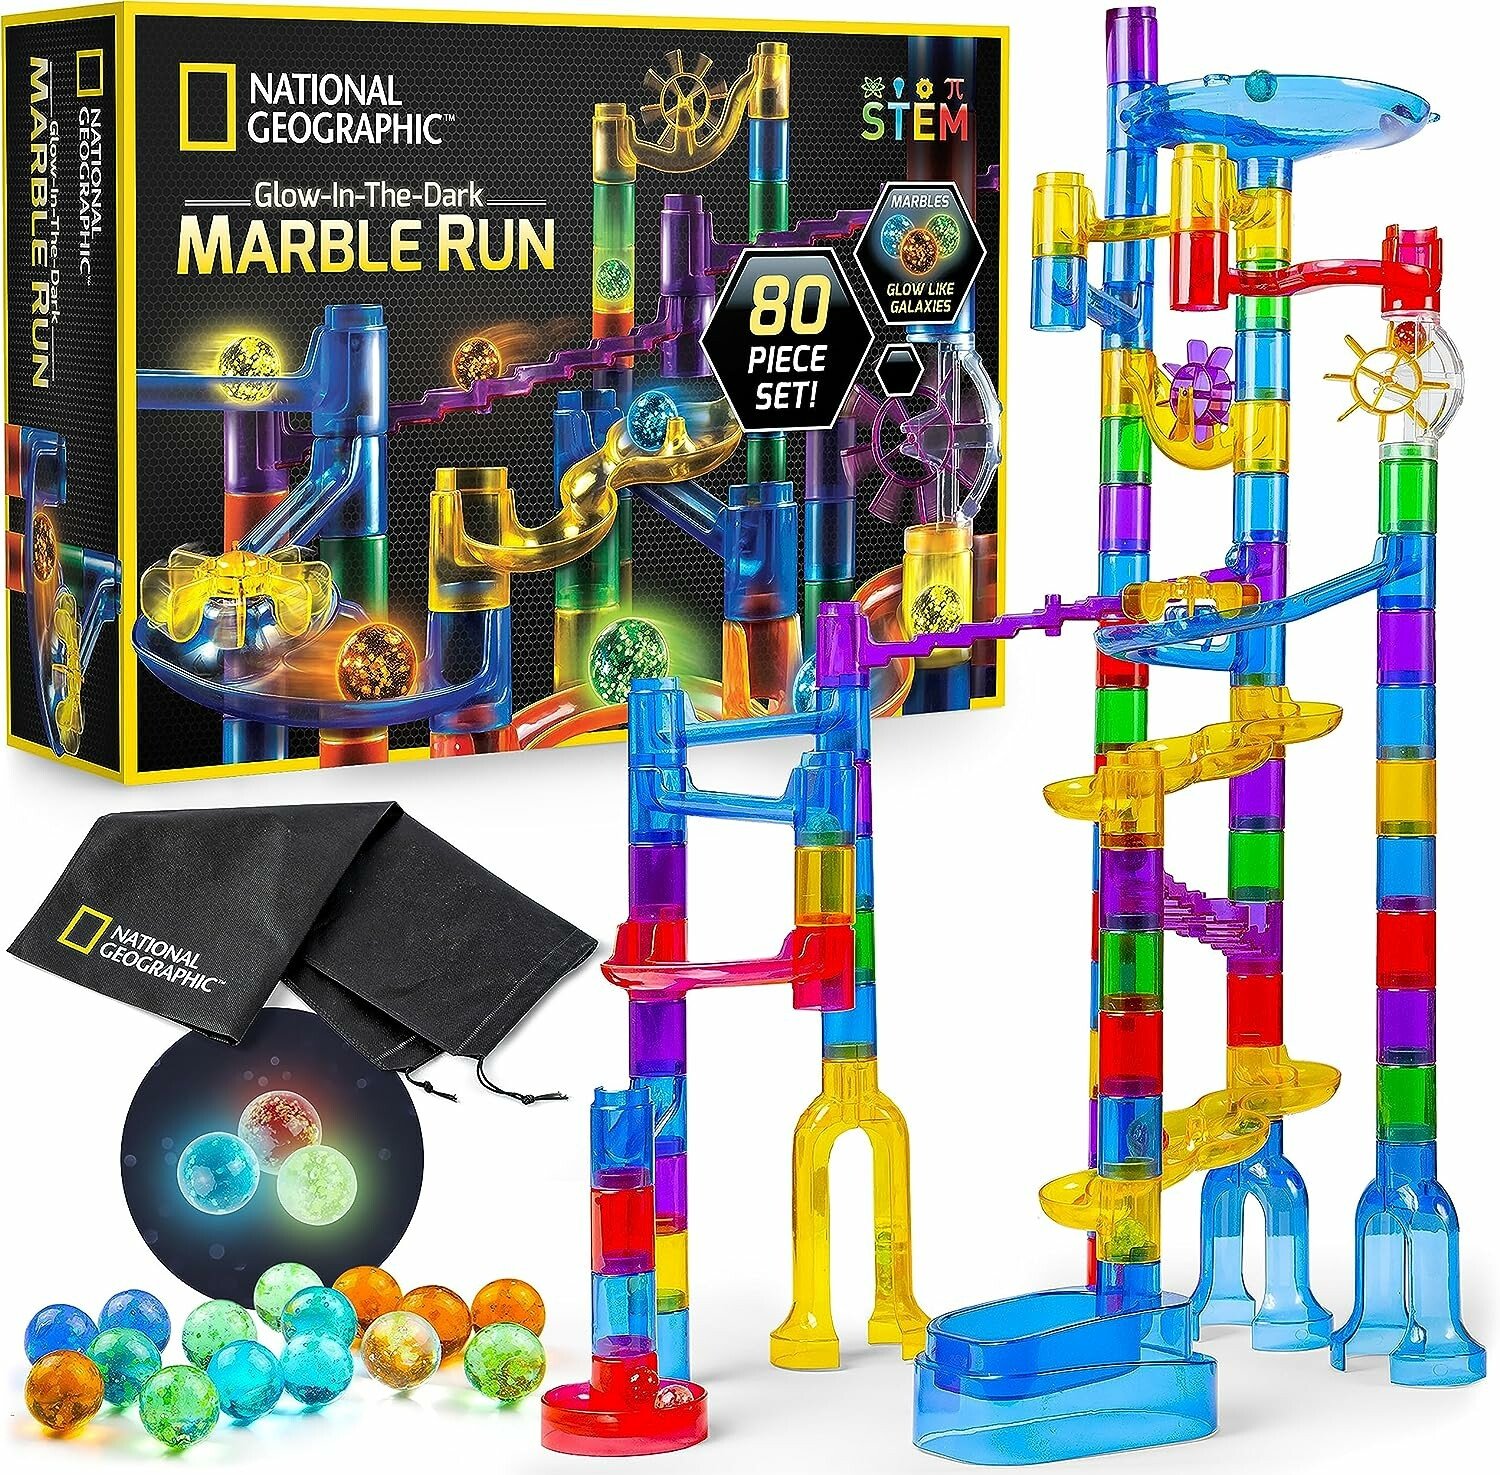 The National Geographic Marble Run